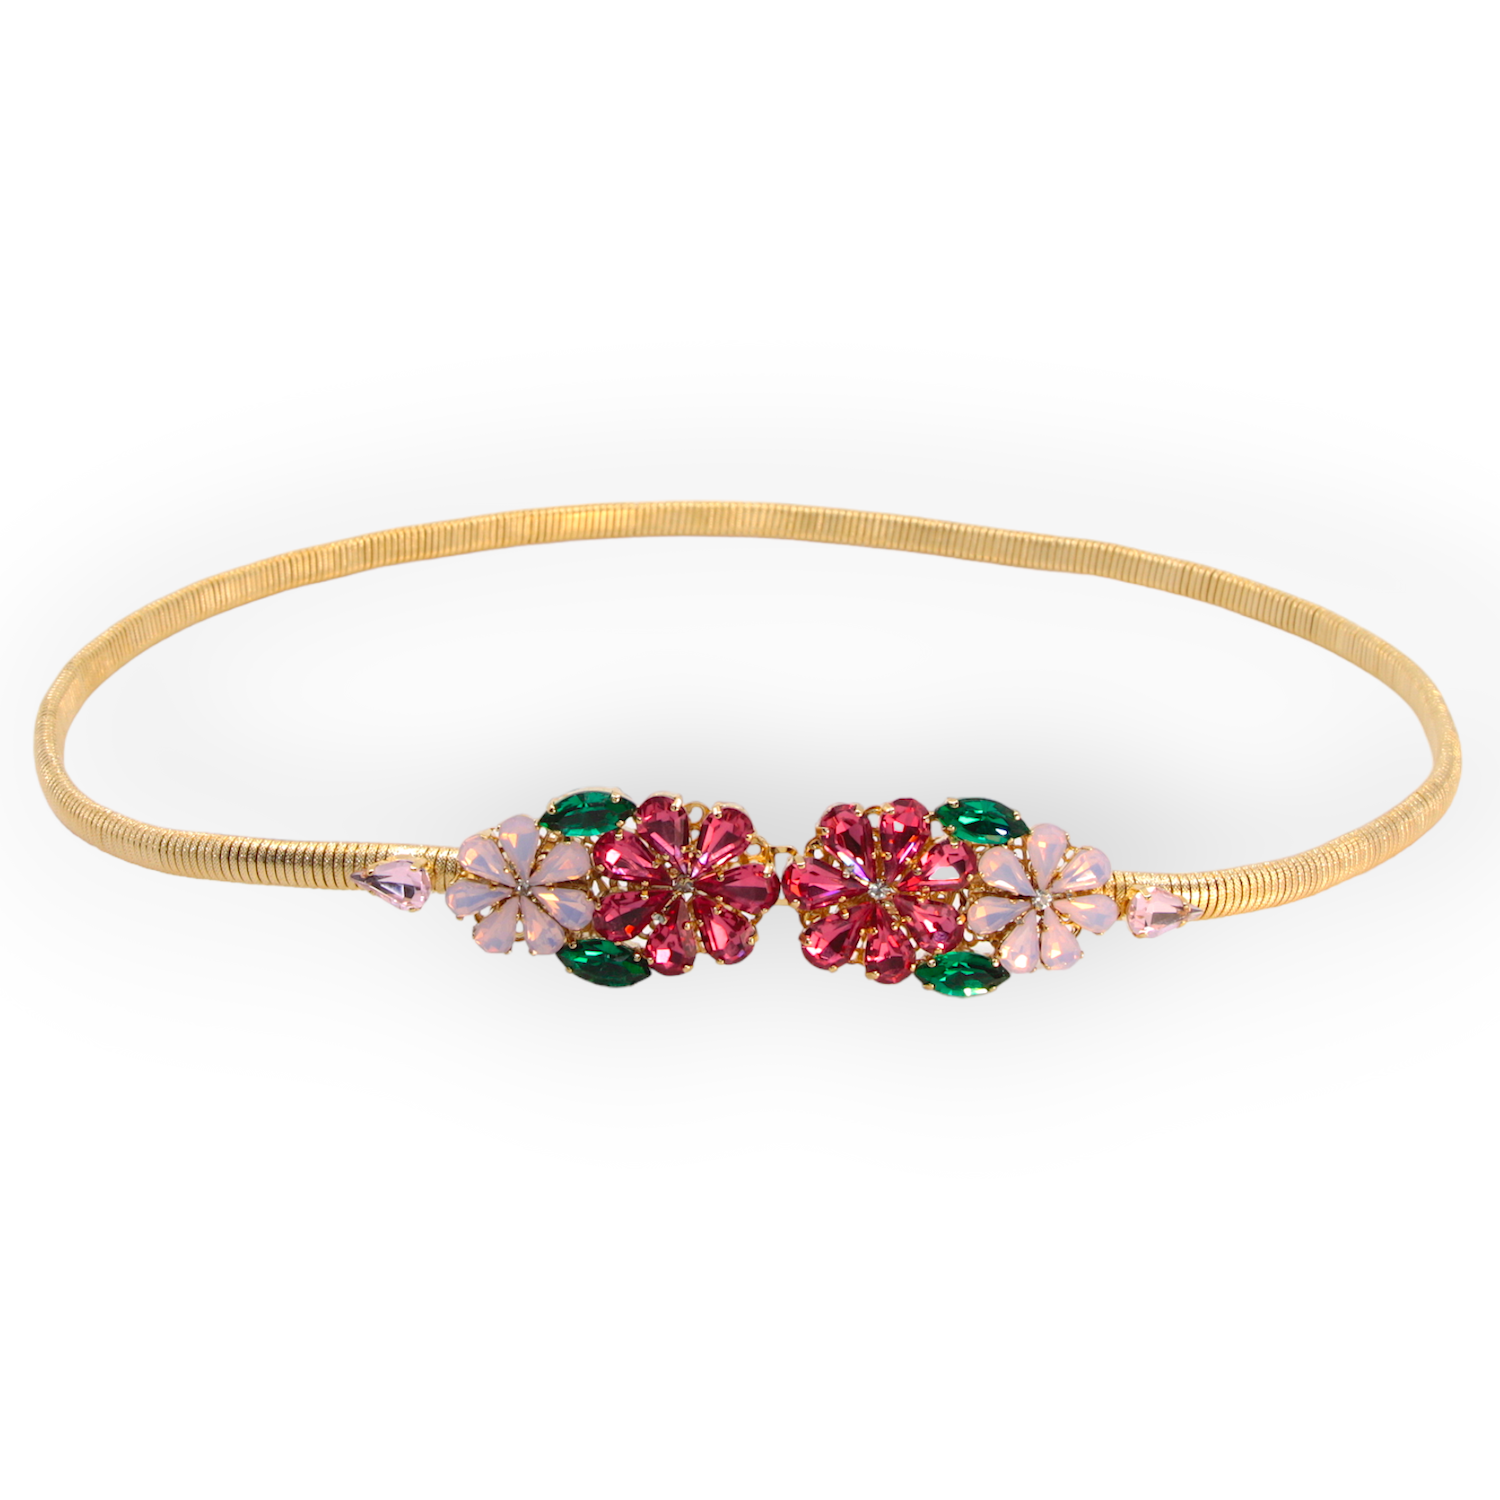 SLIM BELT WITH PINK DAISY BOUQUET CRYSTAL BUCKLE